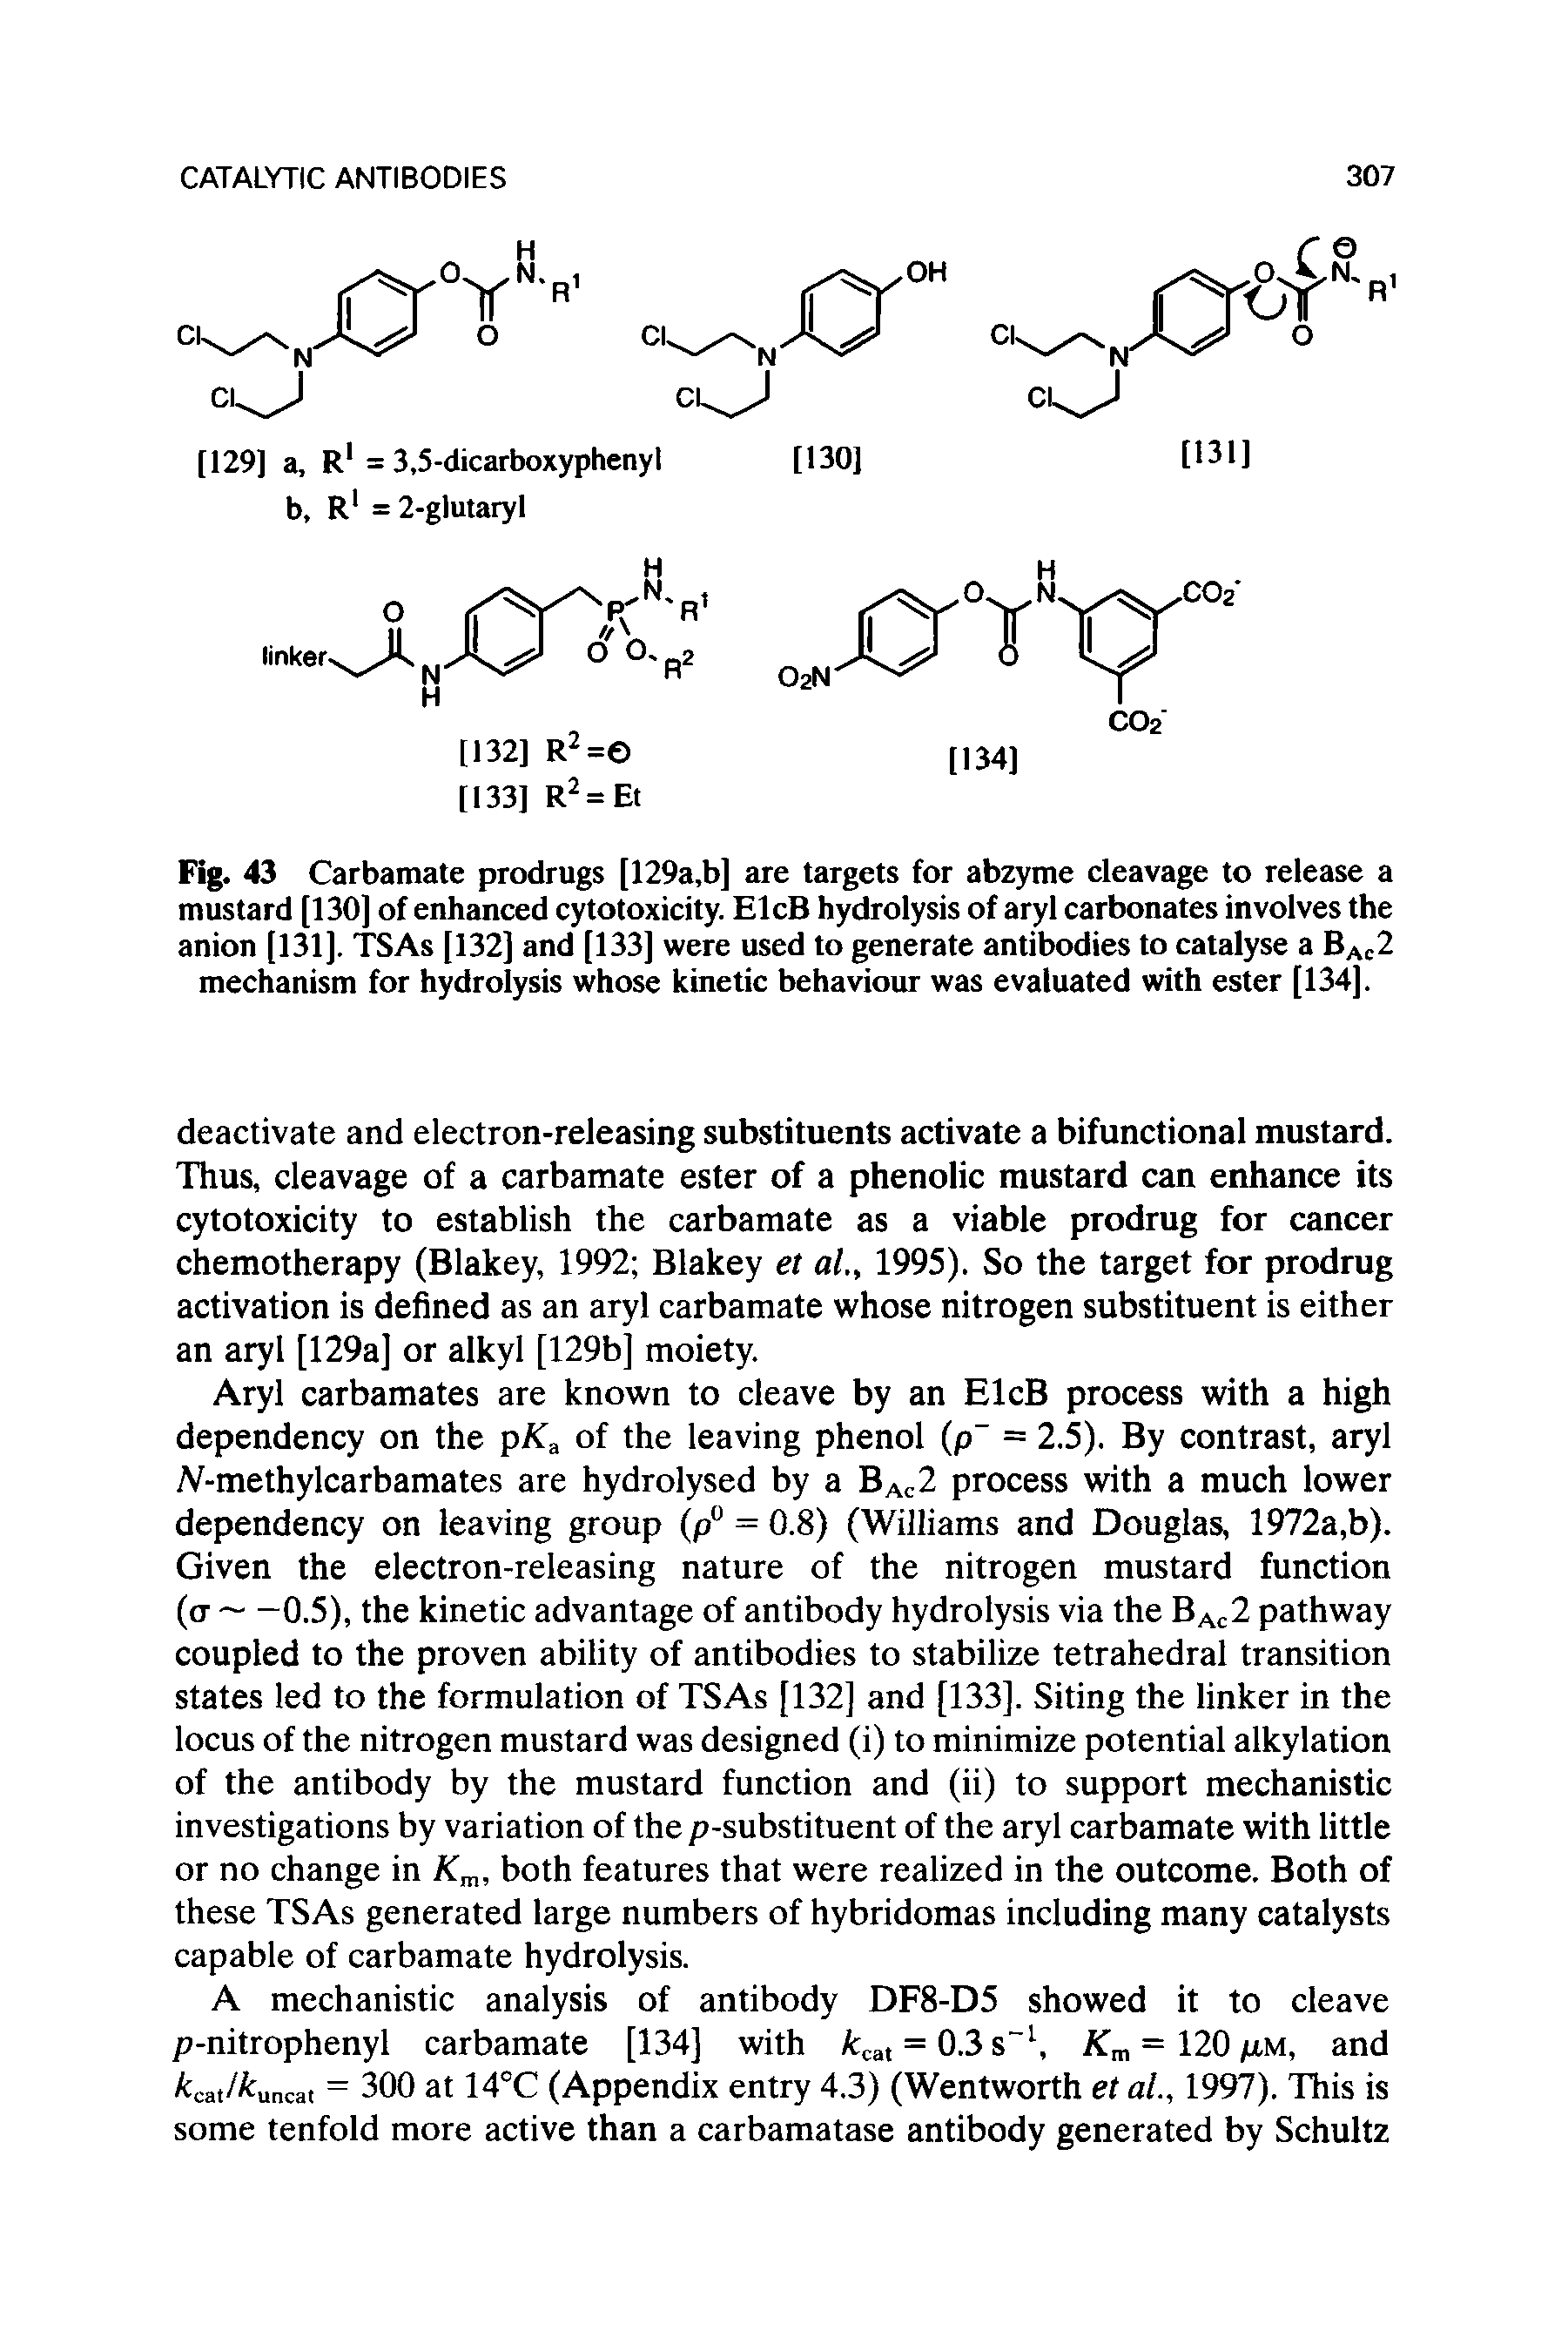 Fig. 43 Carbamate prodrugs [129a,b] are targets for abzyme cleavage to release a mustard [130] of enhanced cytotoxicity. ElcB hydrolysis of aryl carbonates involves the anion [131]. TSAs [132] and [133] were used to generate antibodies to catalyse a BAc2 mechanism for hydrolysis whose kinetic behaviour was evaluated with ester [134].